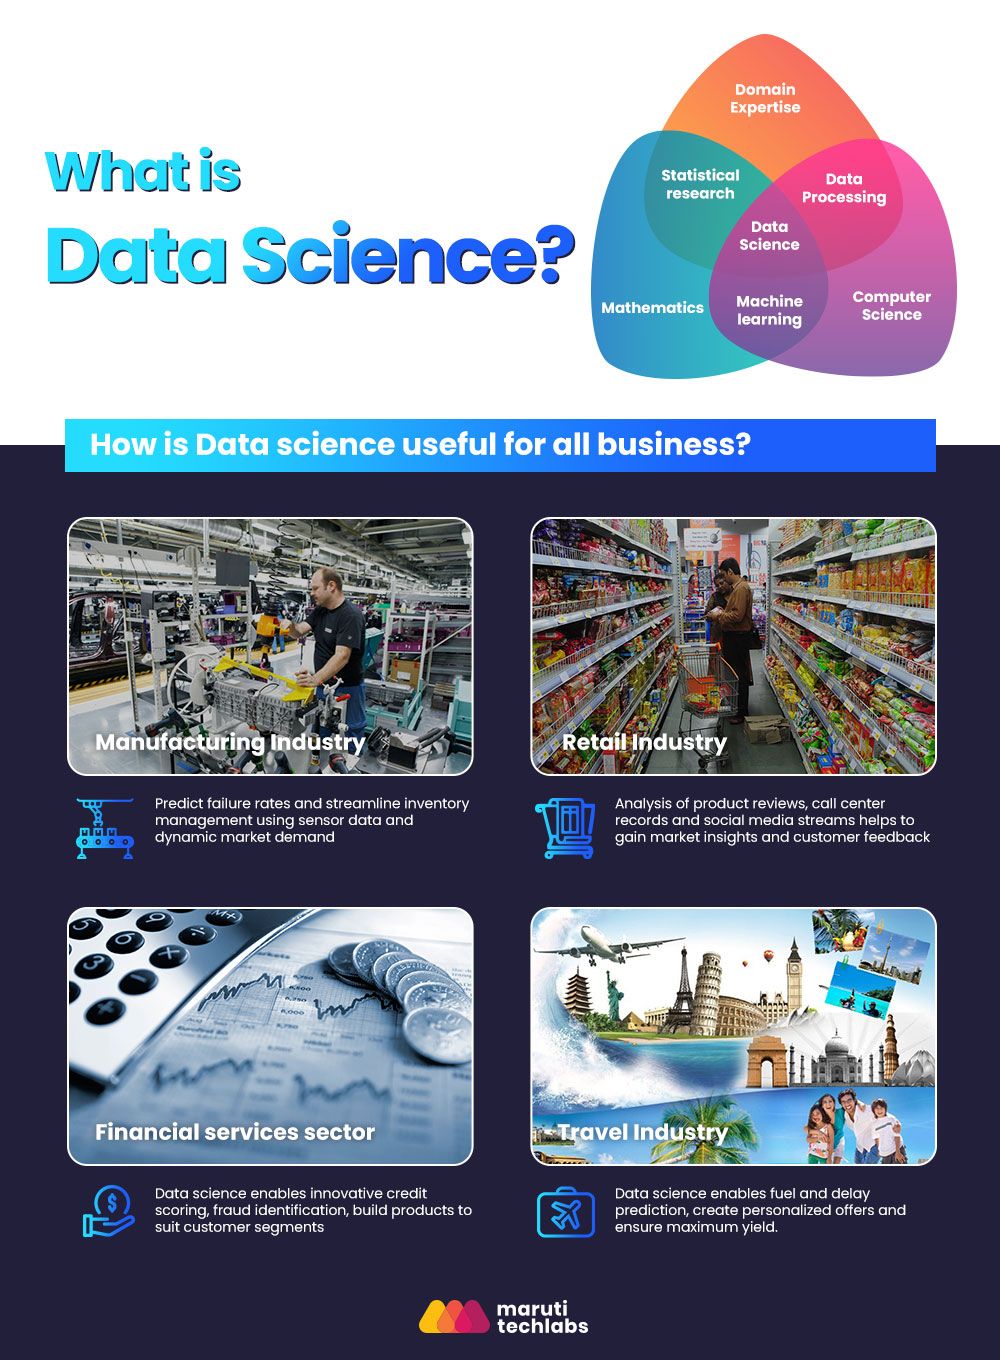 How-data-science-is-useful-for-all-businesses.jpg